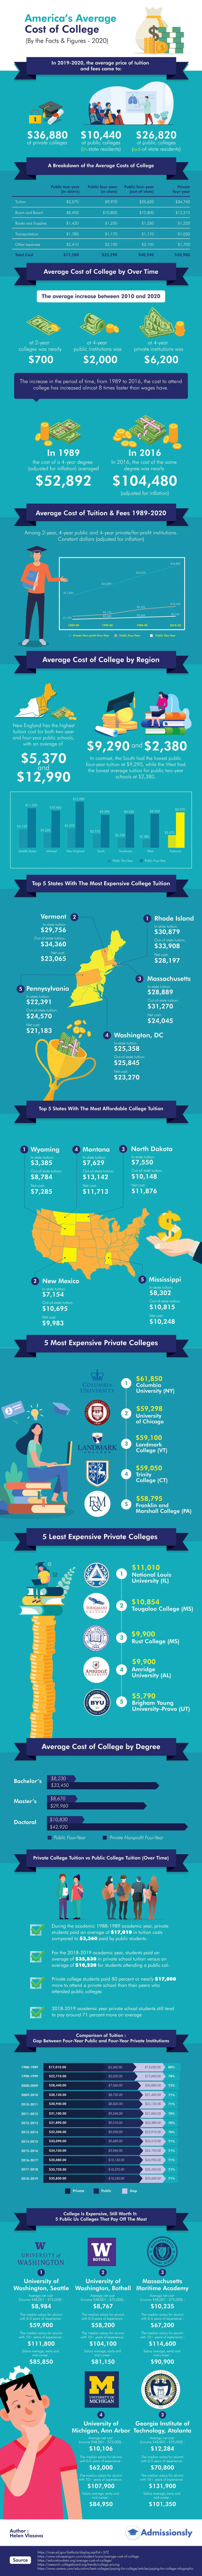 How Much Does College Cost in The U.S? (Facts & Figures) – 2020